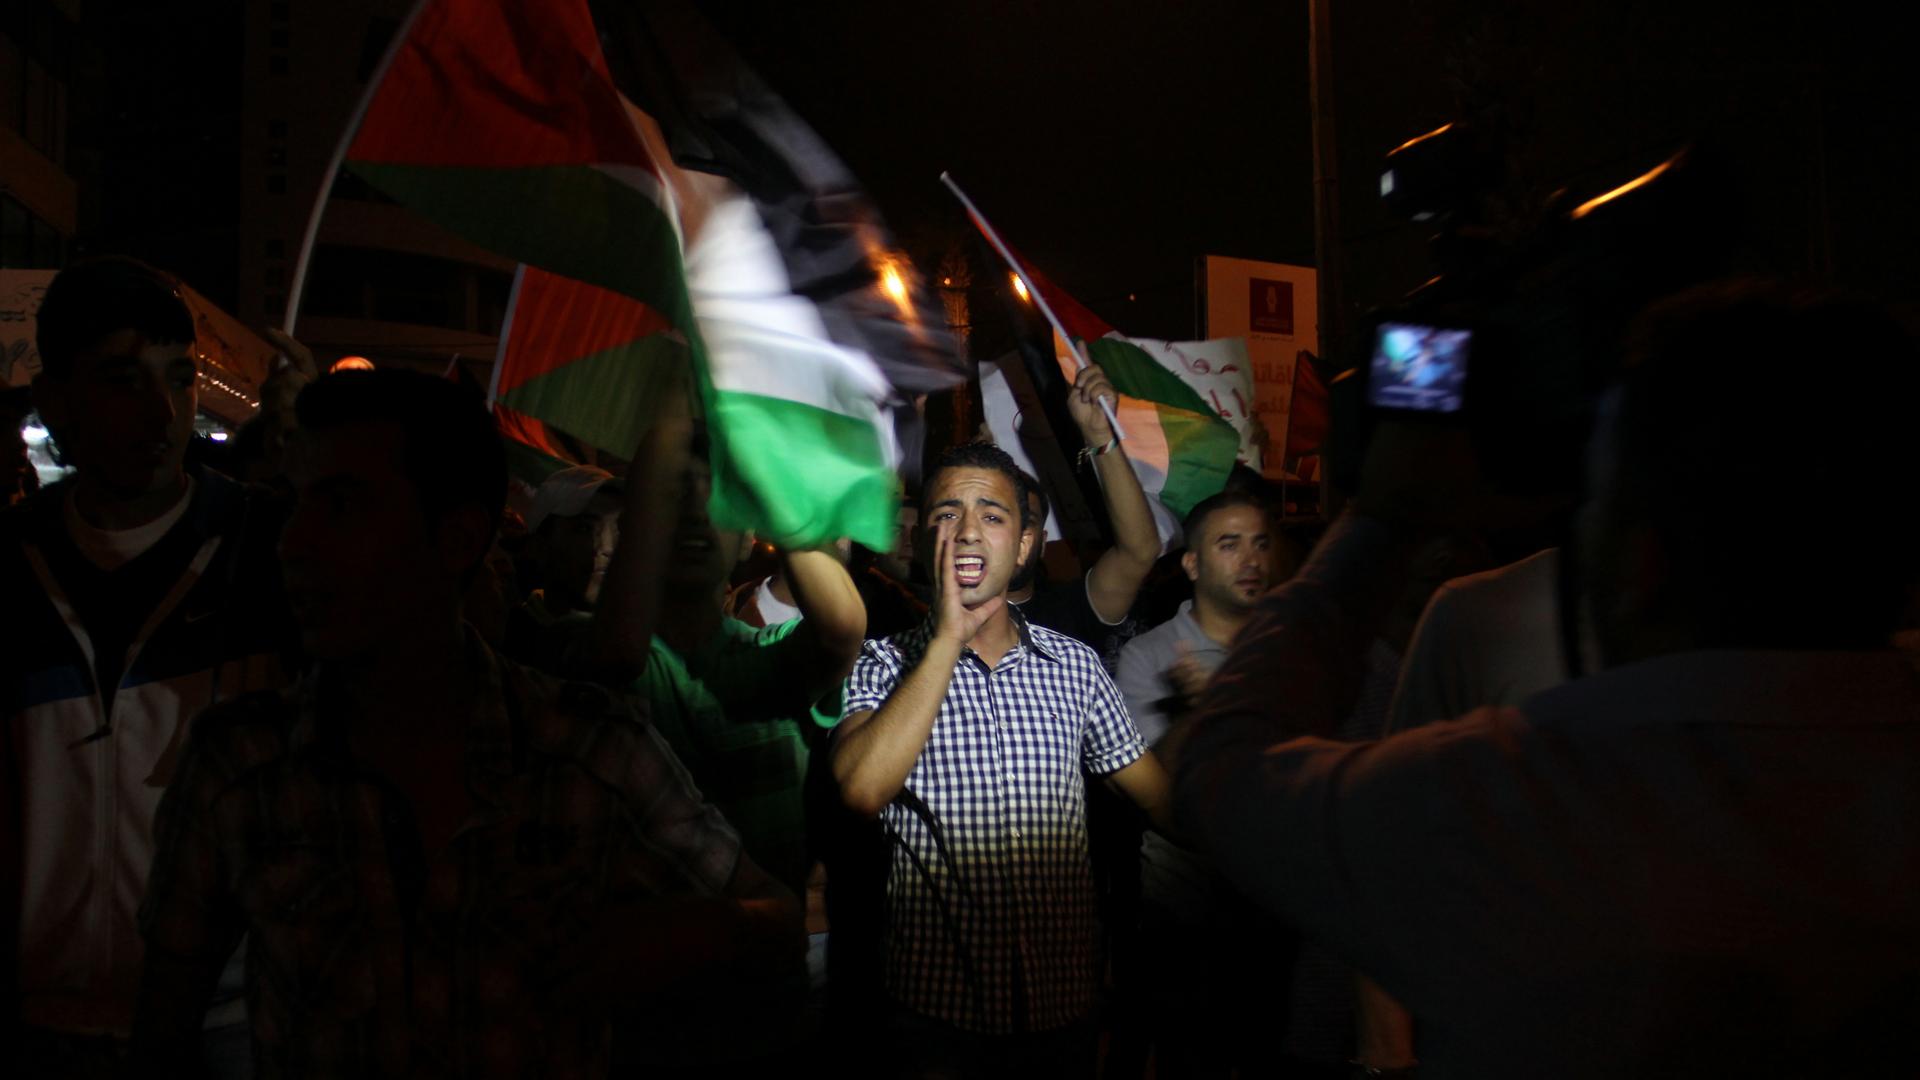 A young Palestinian man chants against Israel’s offensive in the Gaza Strip as he marches from Ramallah toward the Israeli settlement and military base at Beit El. 